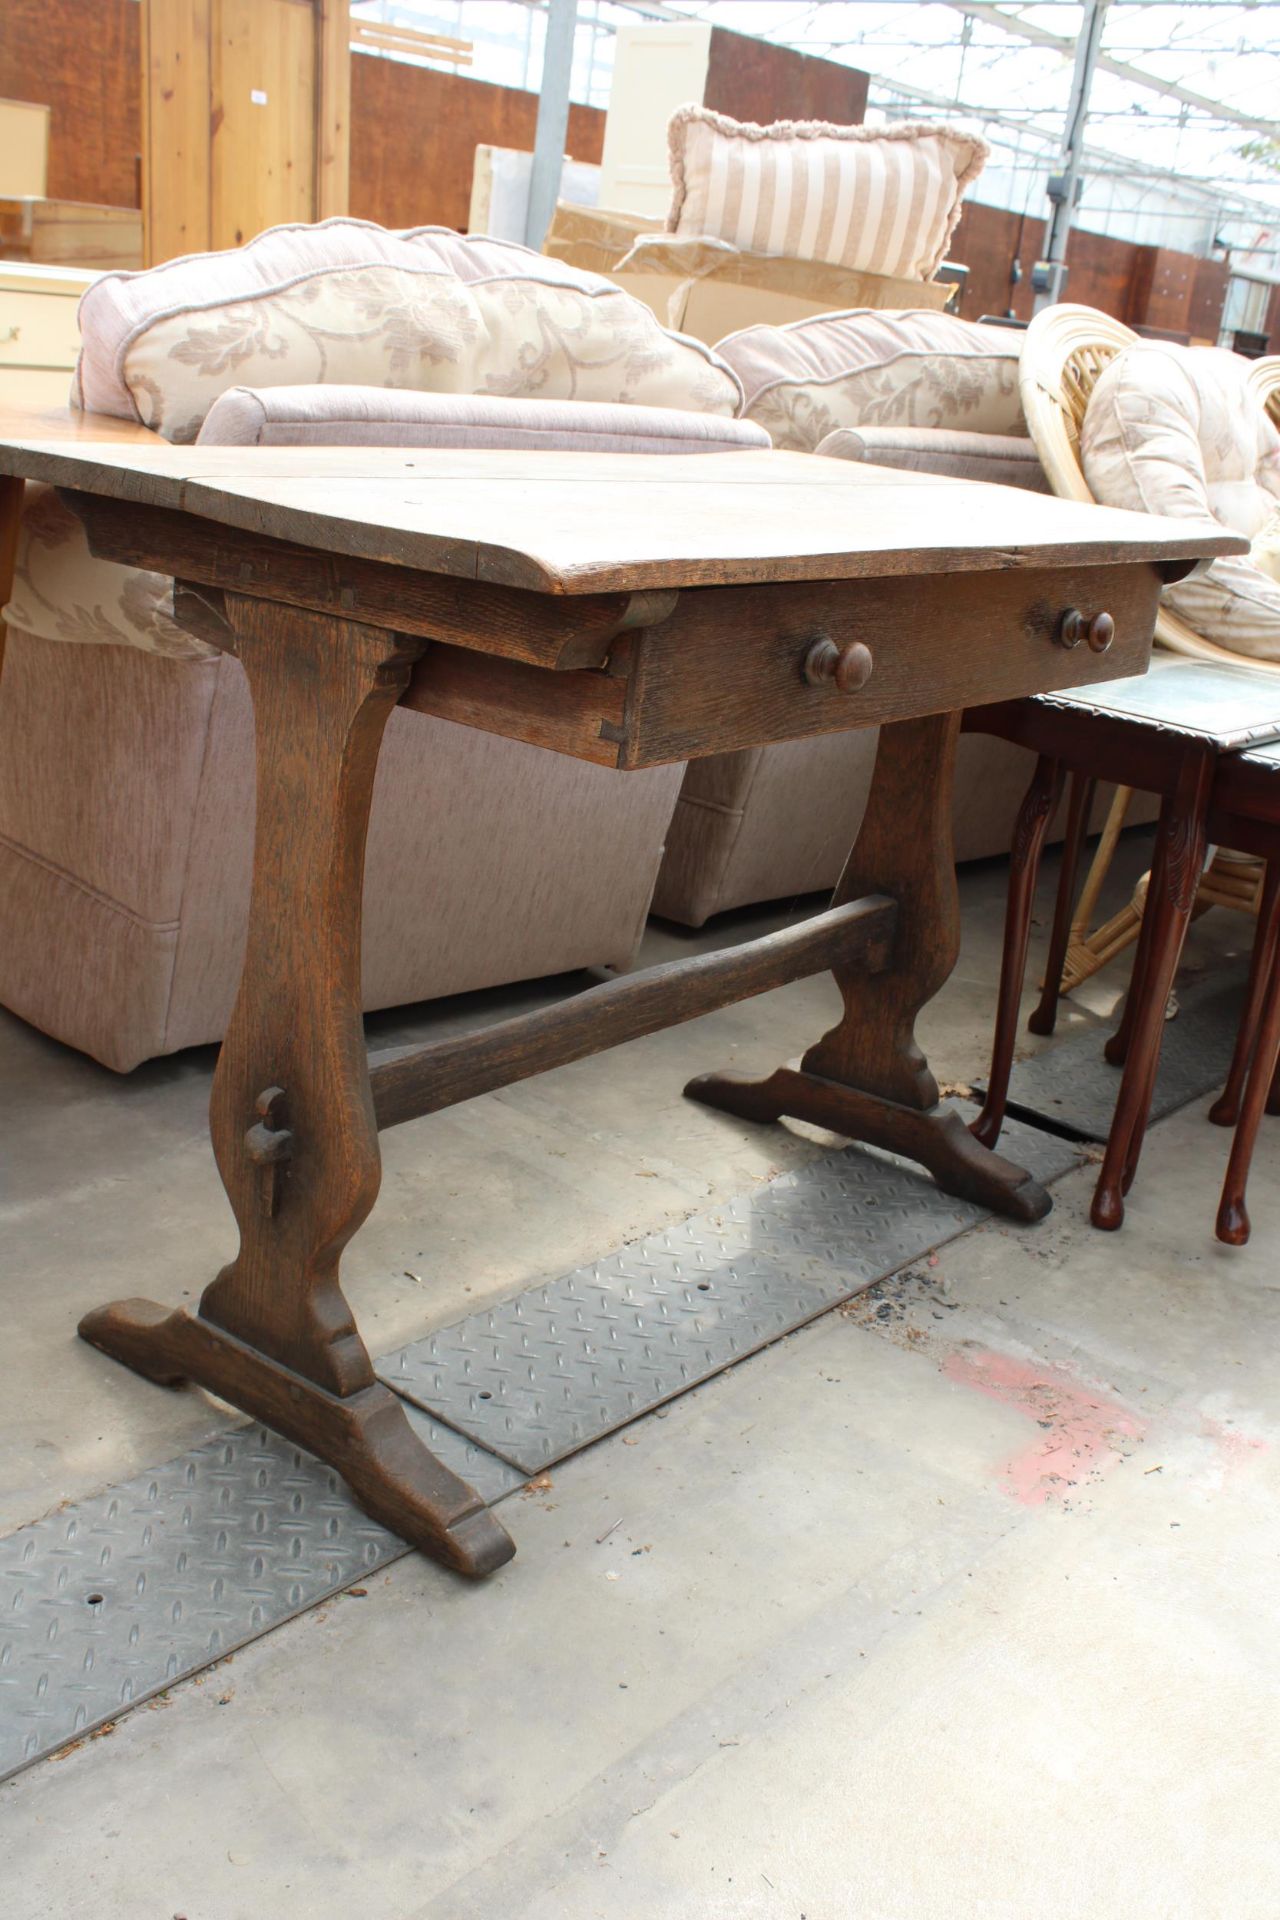 AN OAK 18TH CENTURY STYLE PEDESTAL SIDE-TABLE WITH SINGLE DRAWER, 42" X 23" - Image 2 of 3